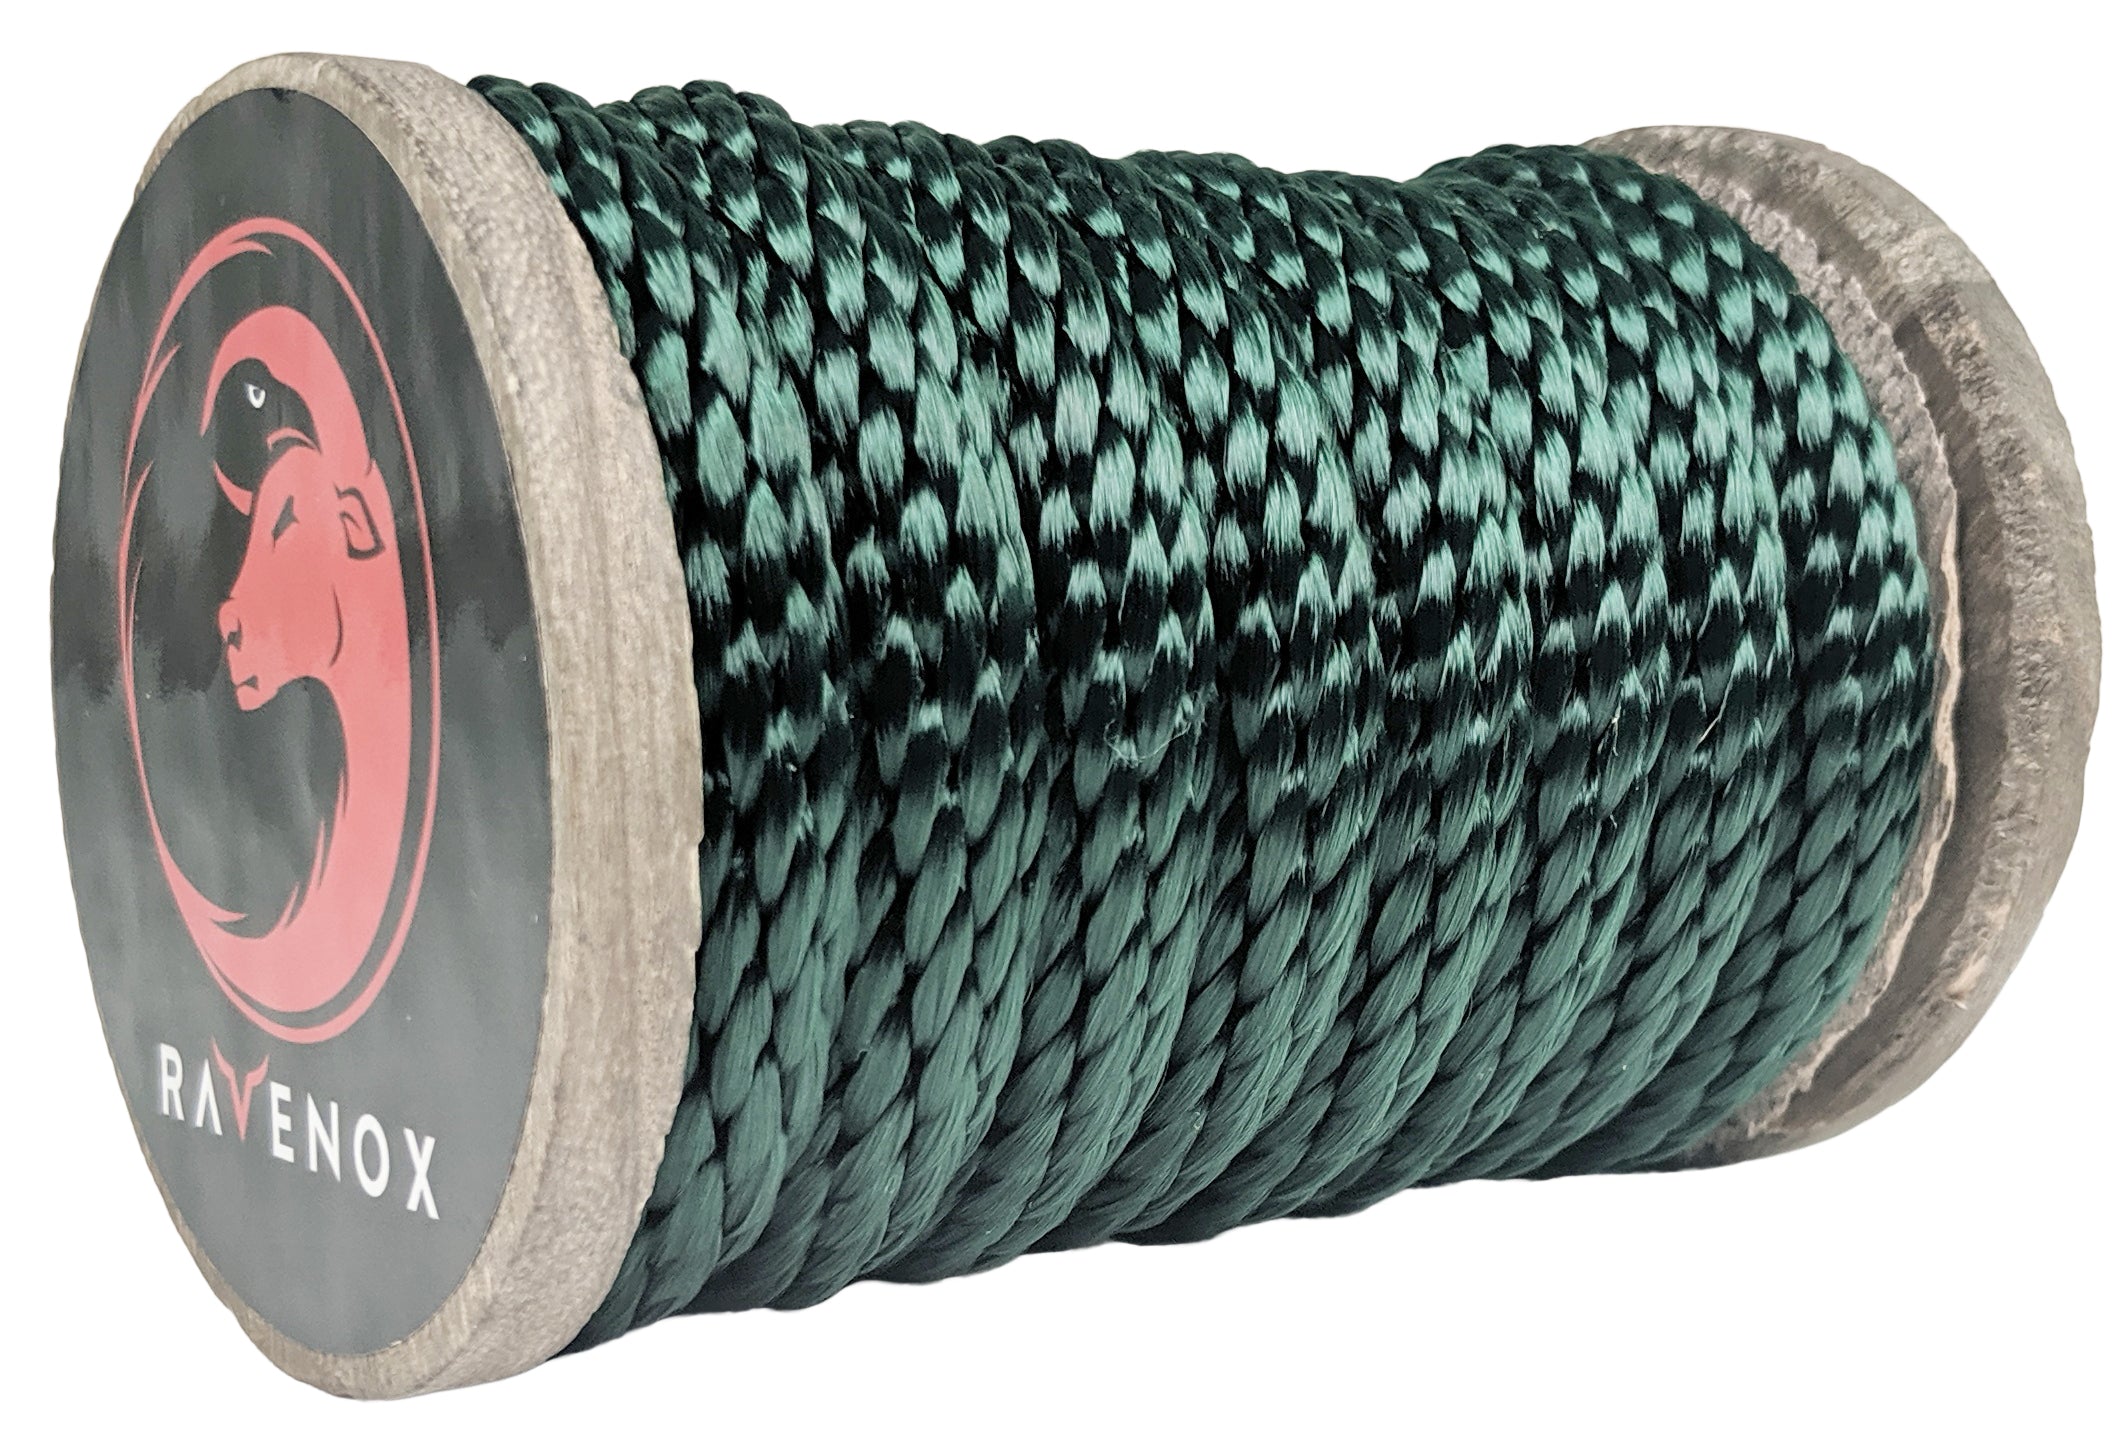 Ravenox Green Braided Utility Rope | Soft & Durable for All Use 1/2 inch x 25 Feet